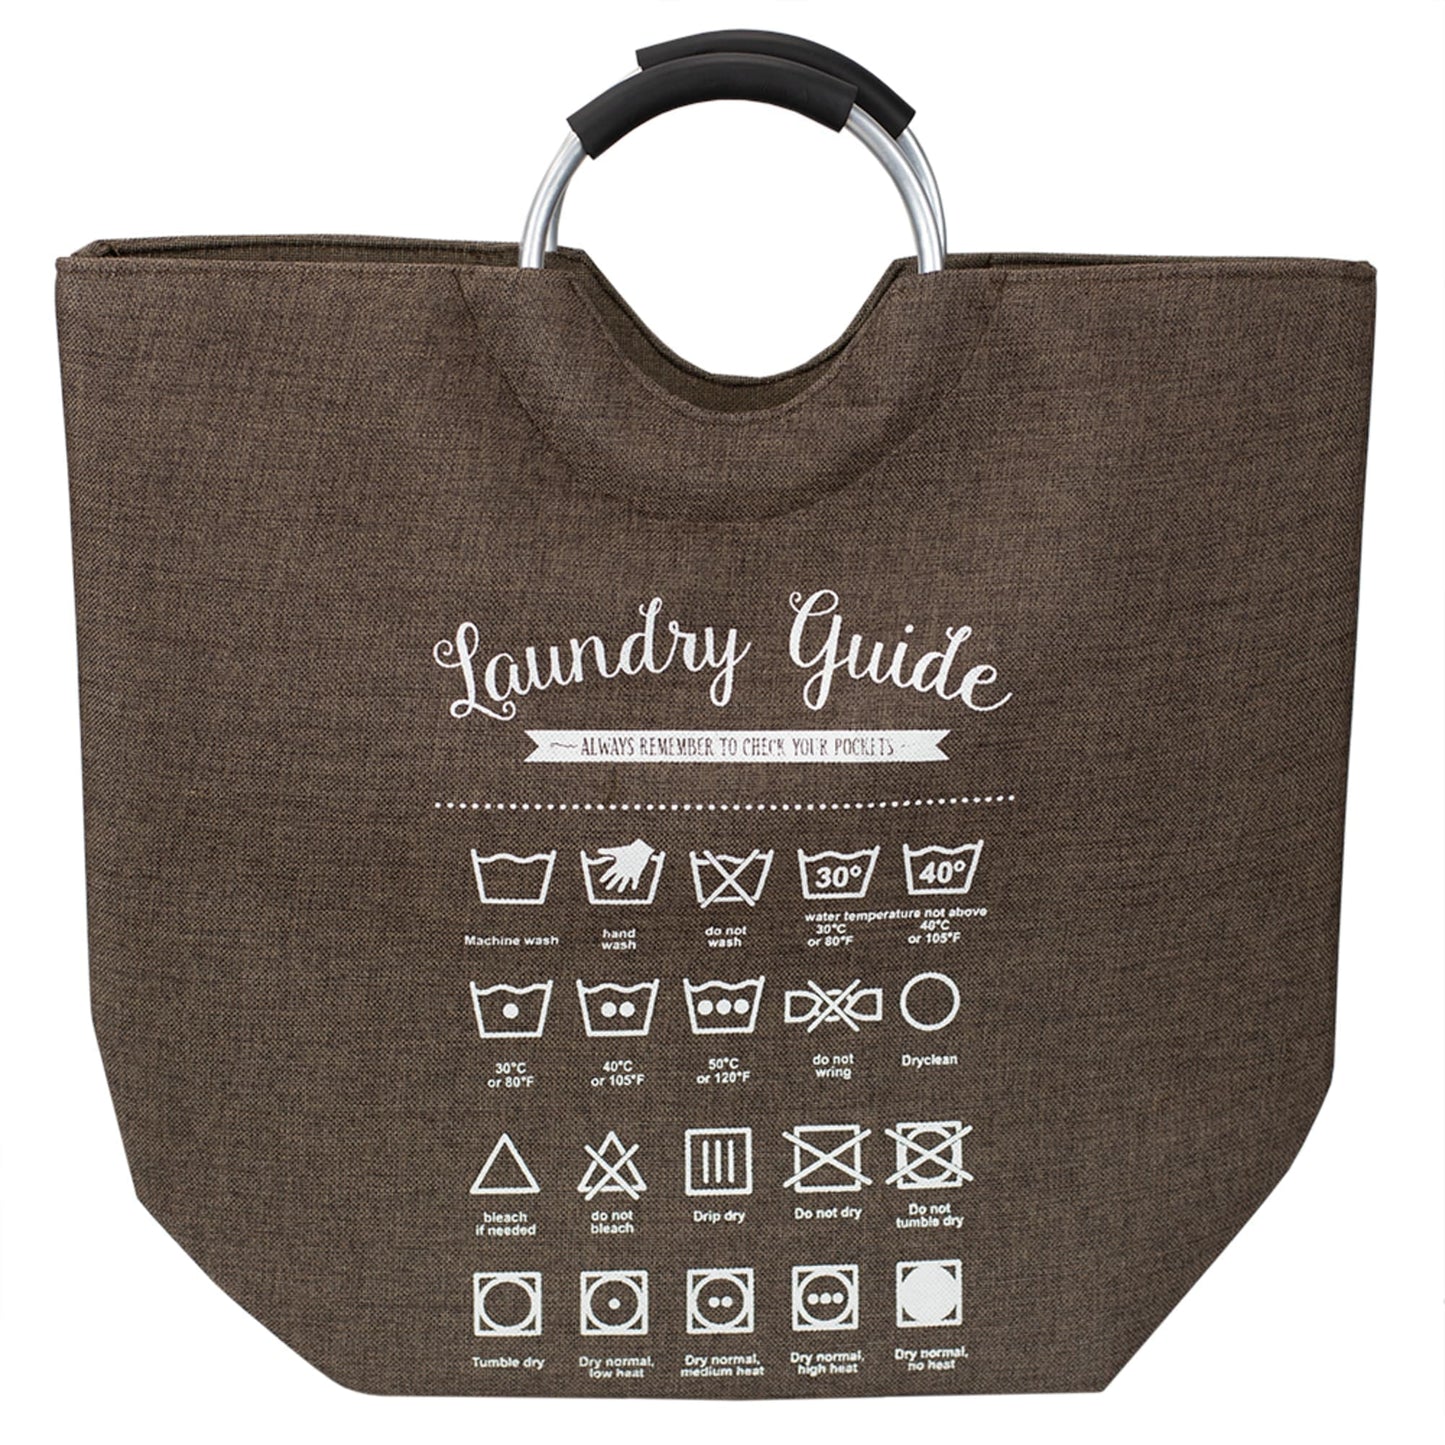 Laundry Guide Canvas Hamper Tote with Soft Grip Handles, Brown